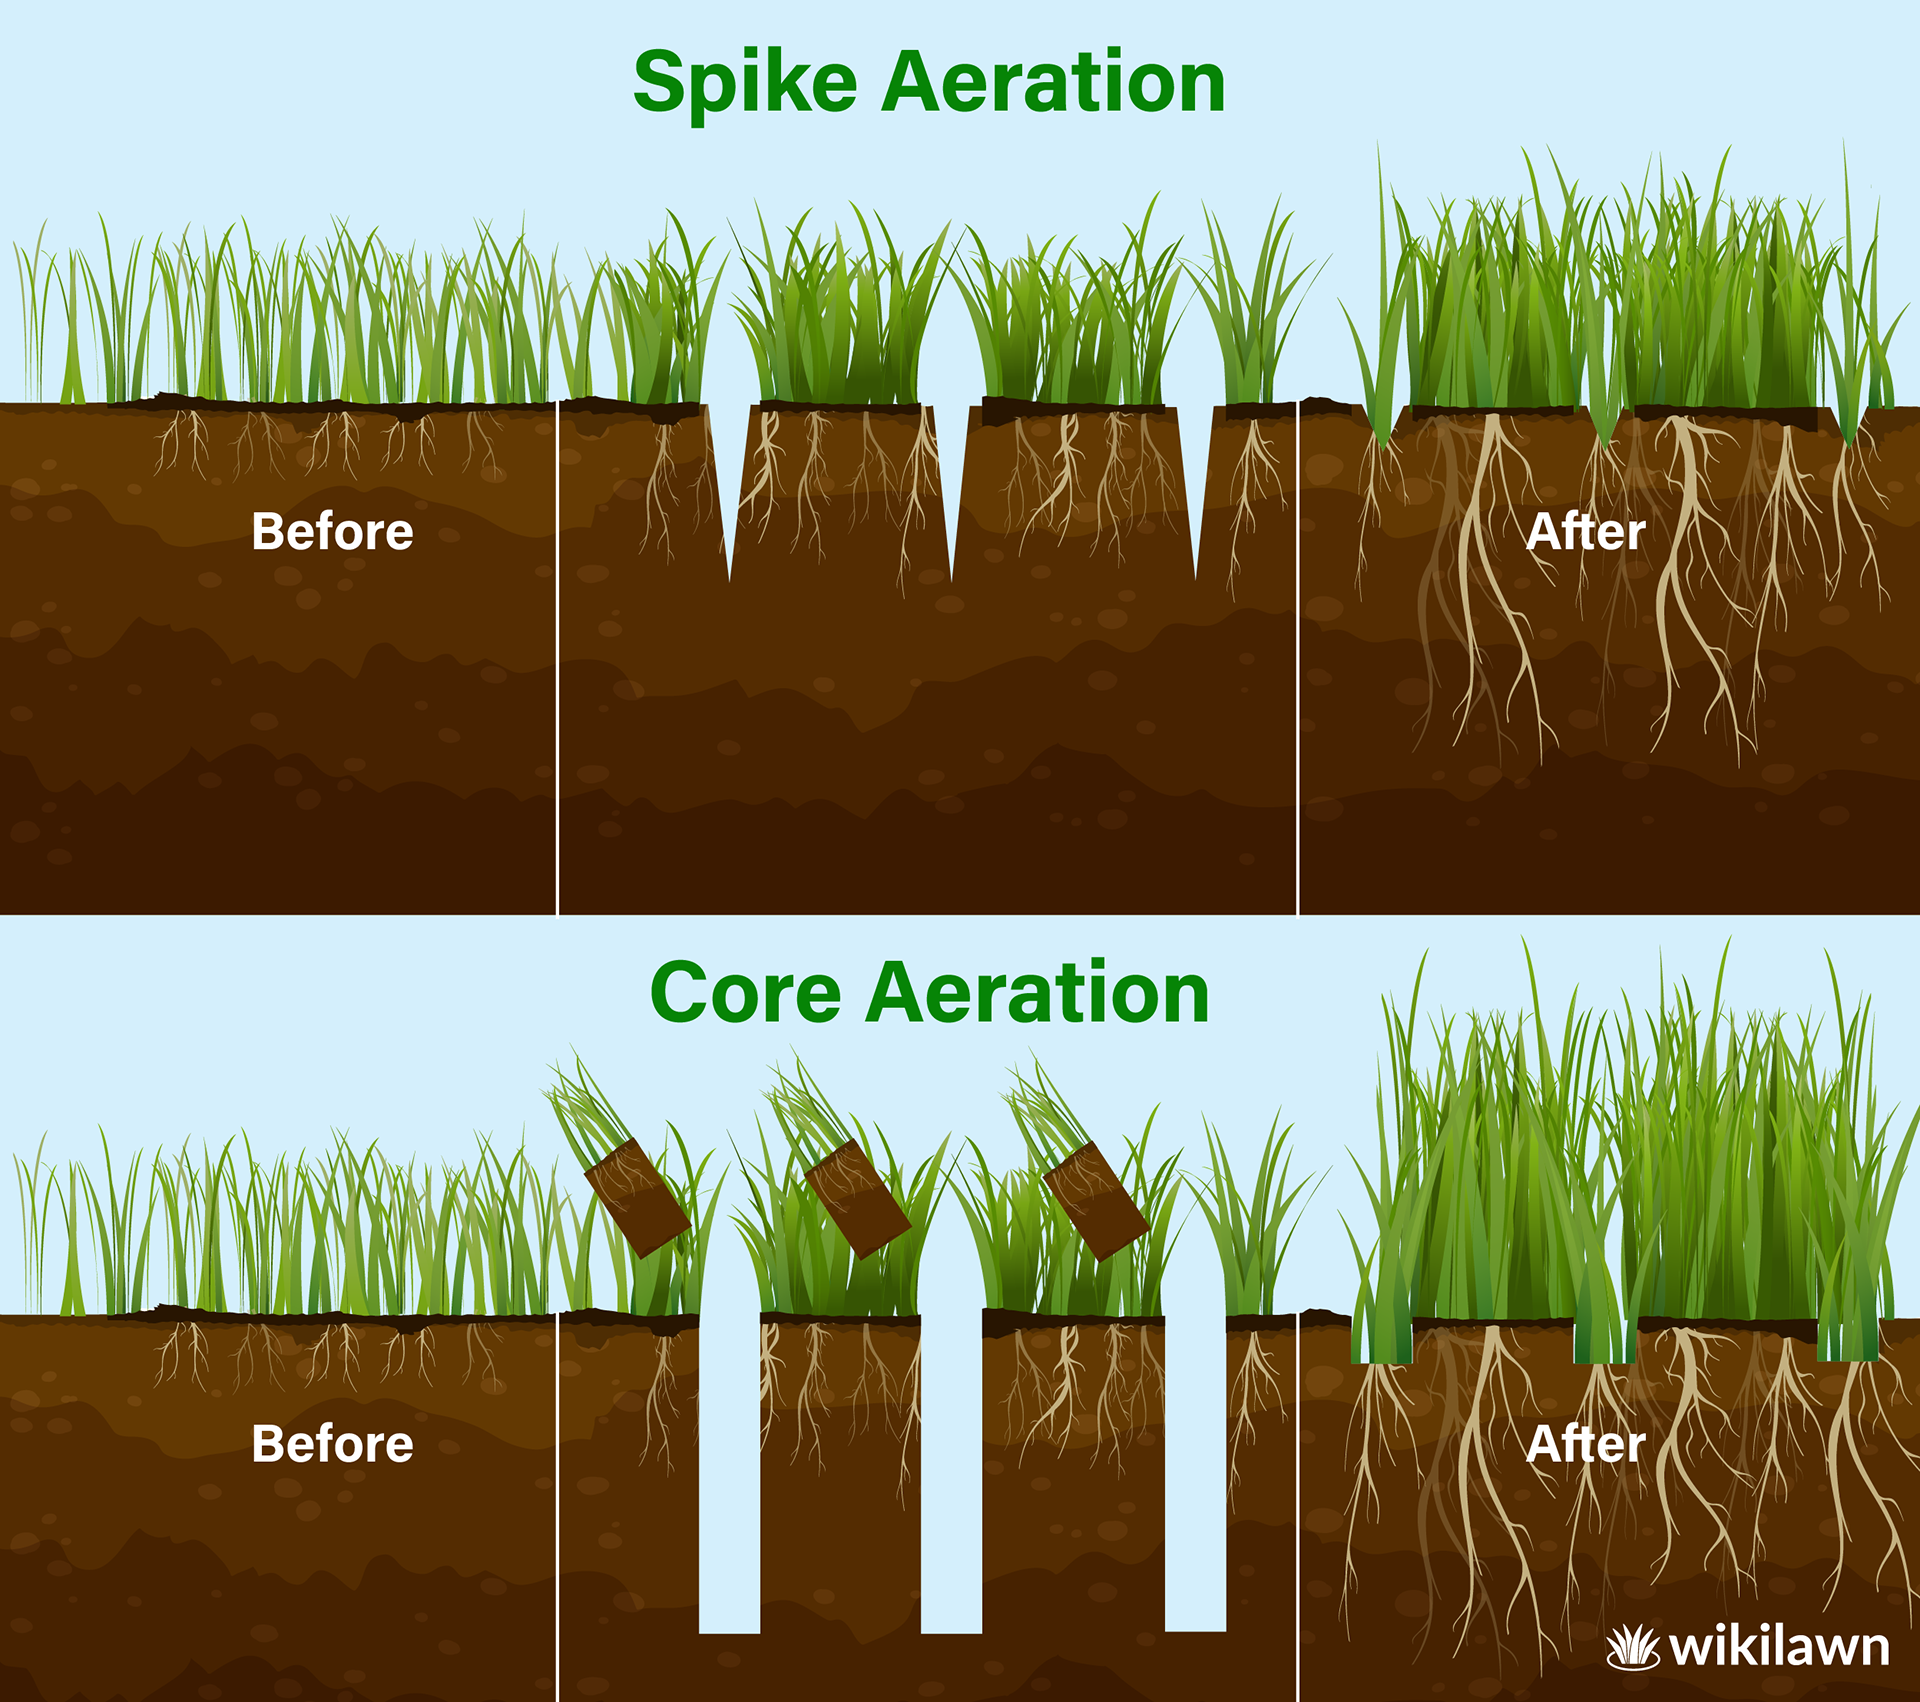 illustration of the soil after spike aeration versus after core aeration